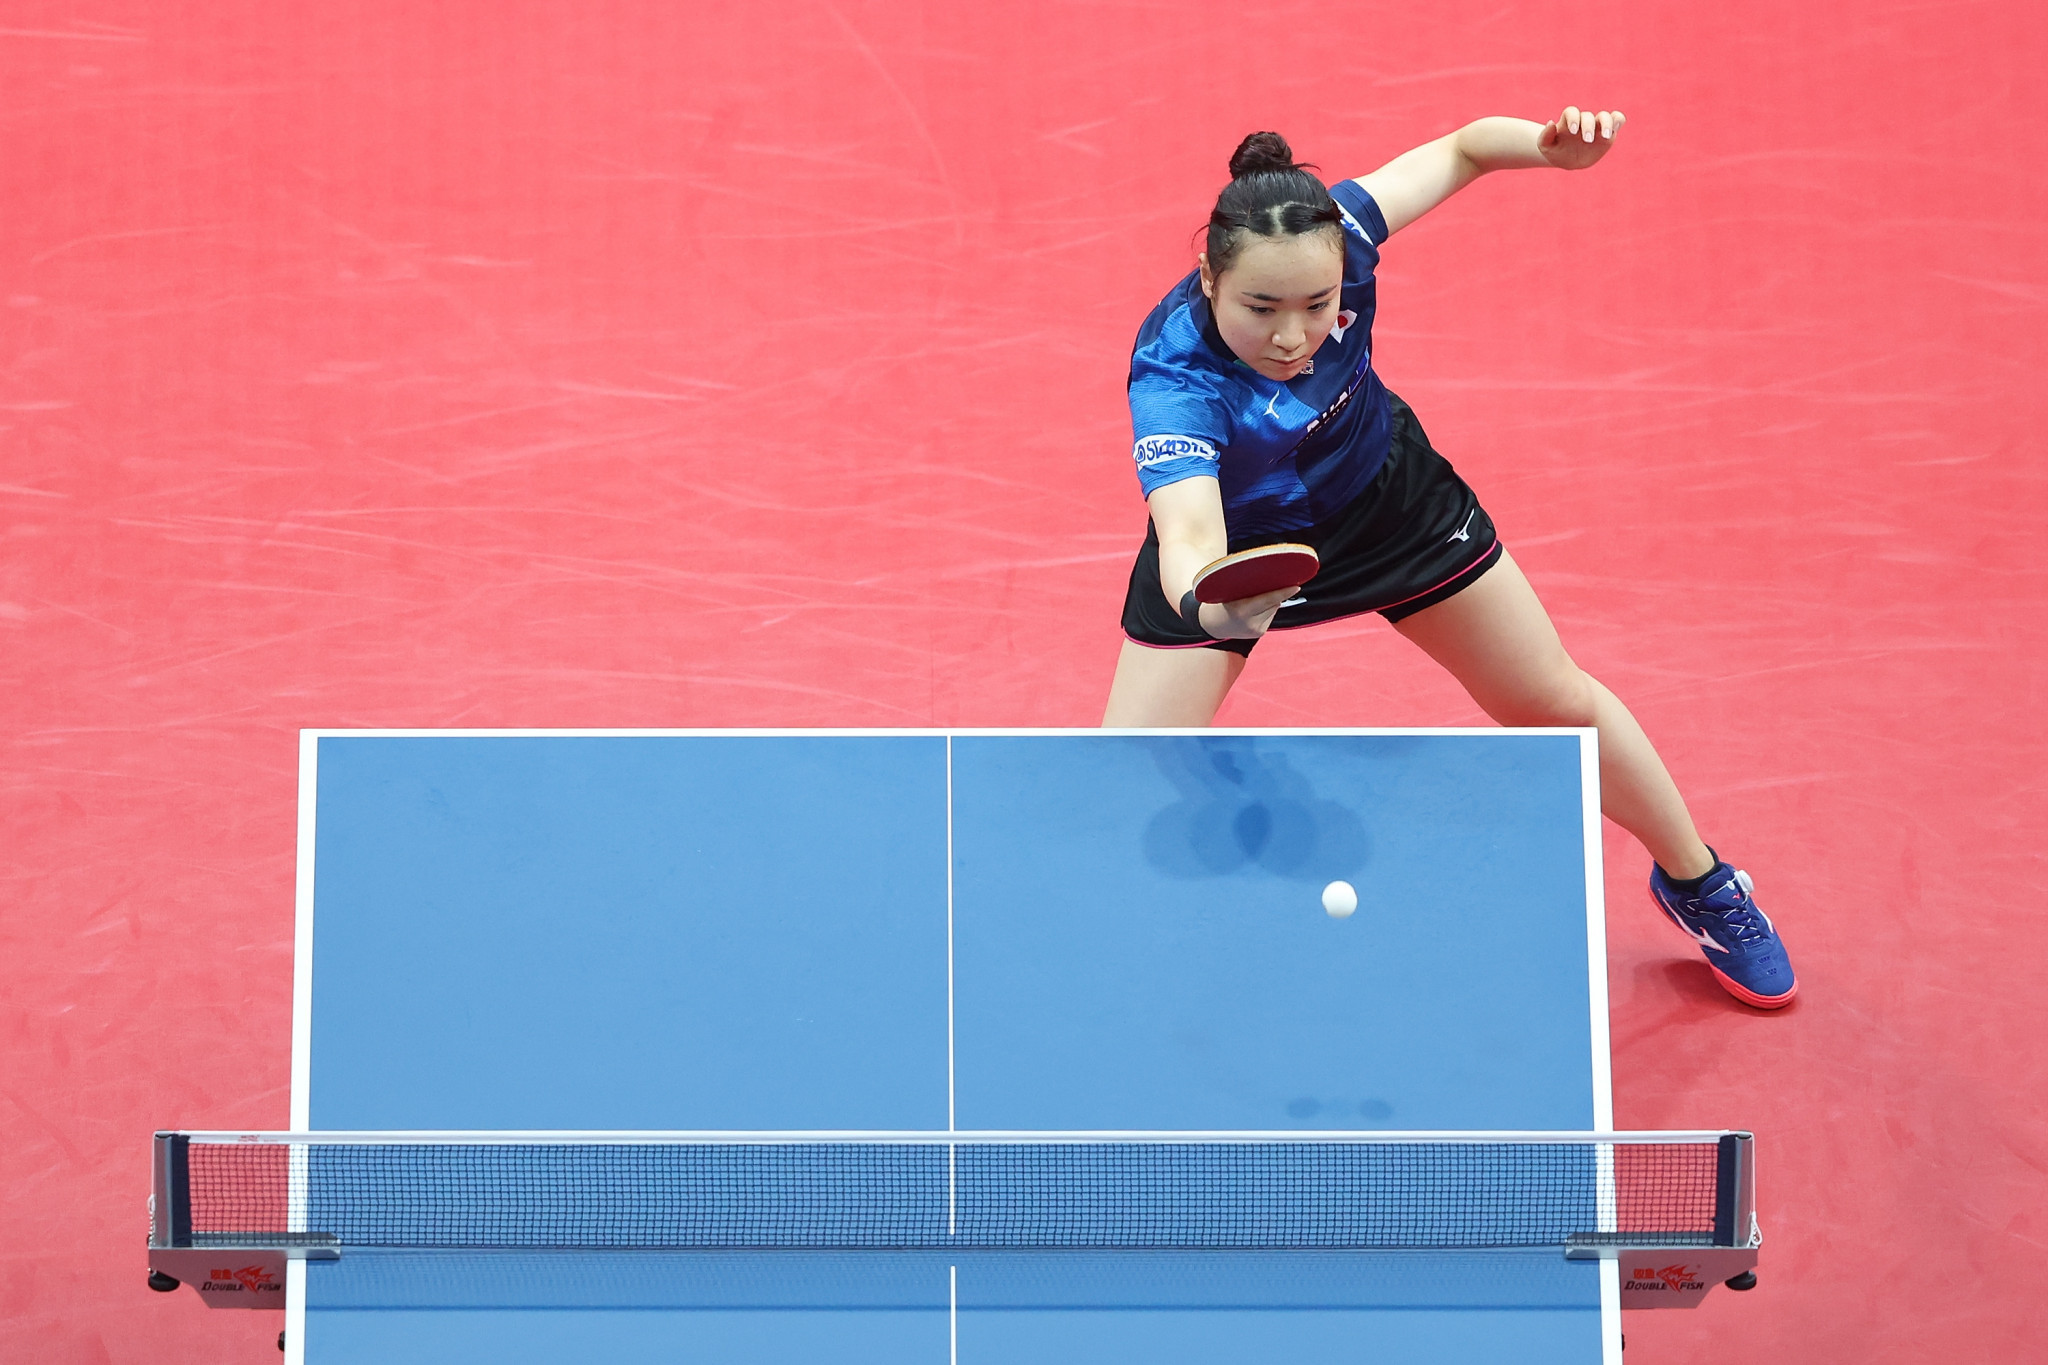 Mima Ito will play Japanese compatriot Hina Hiyata in the women's singles final at the WTT Contender in Doha ©Getty Images